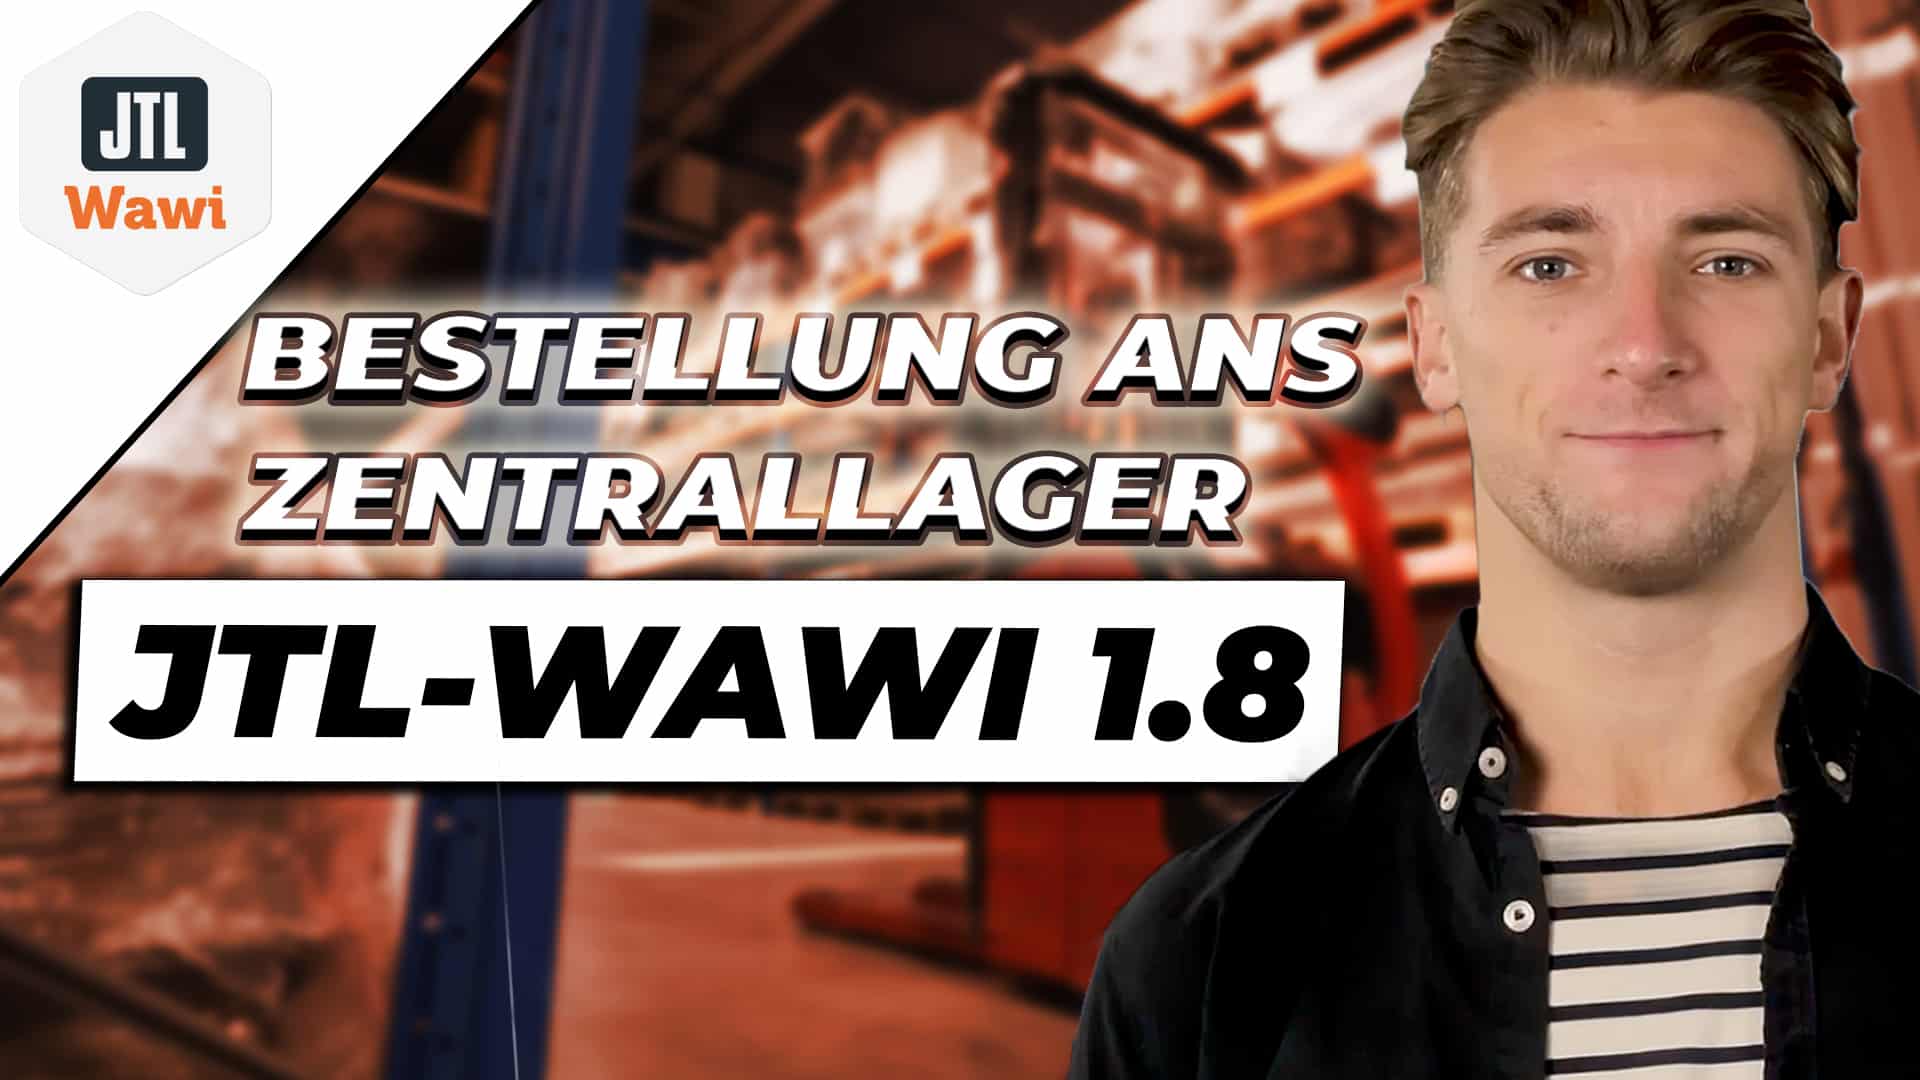 JTL-Wawi 1.8 – Order to a central warehouse